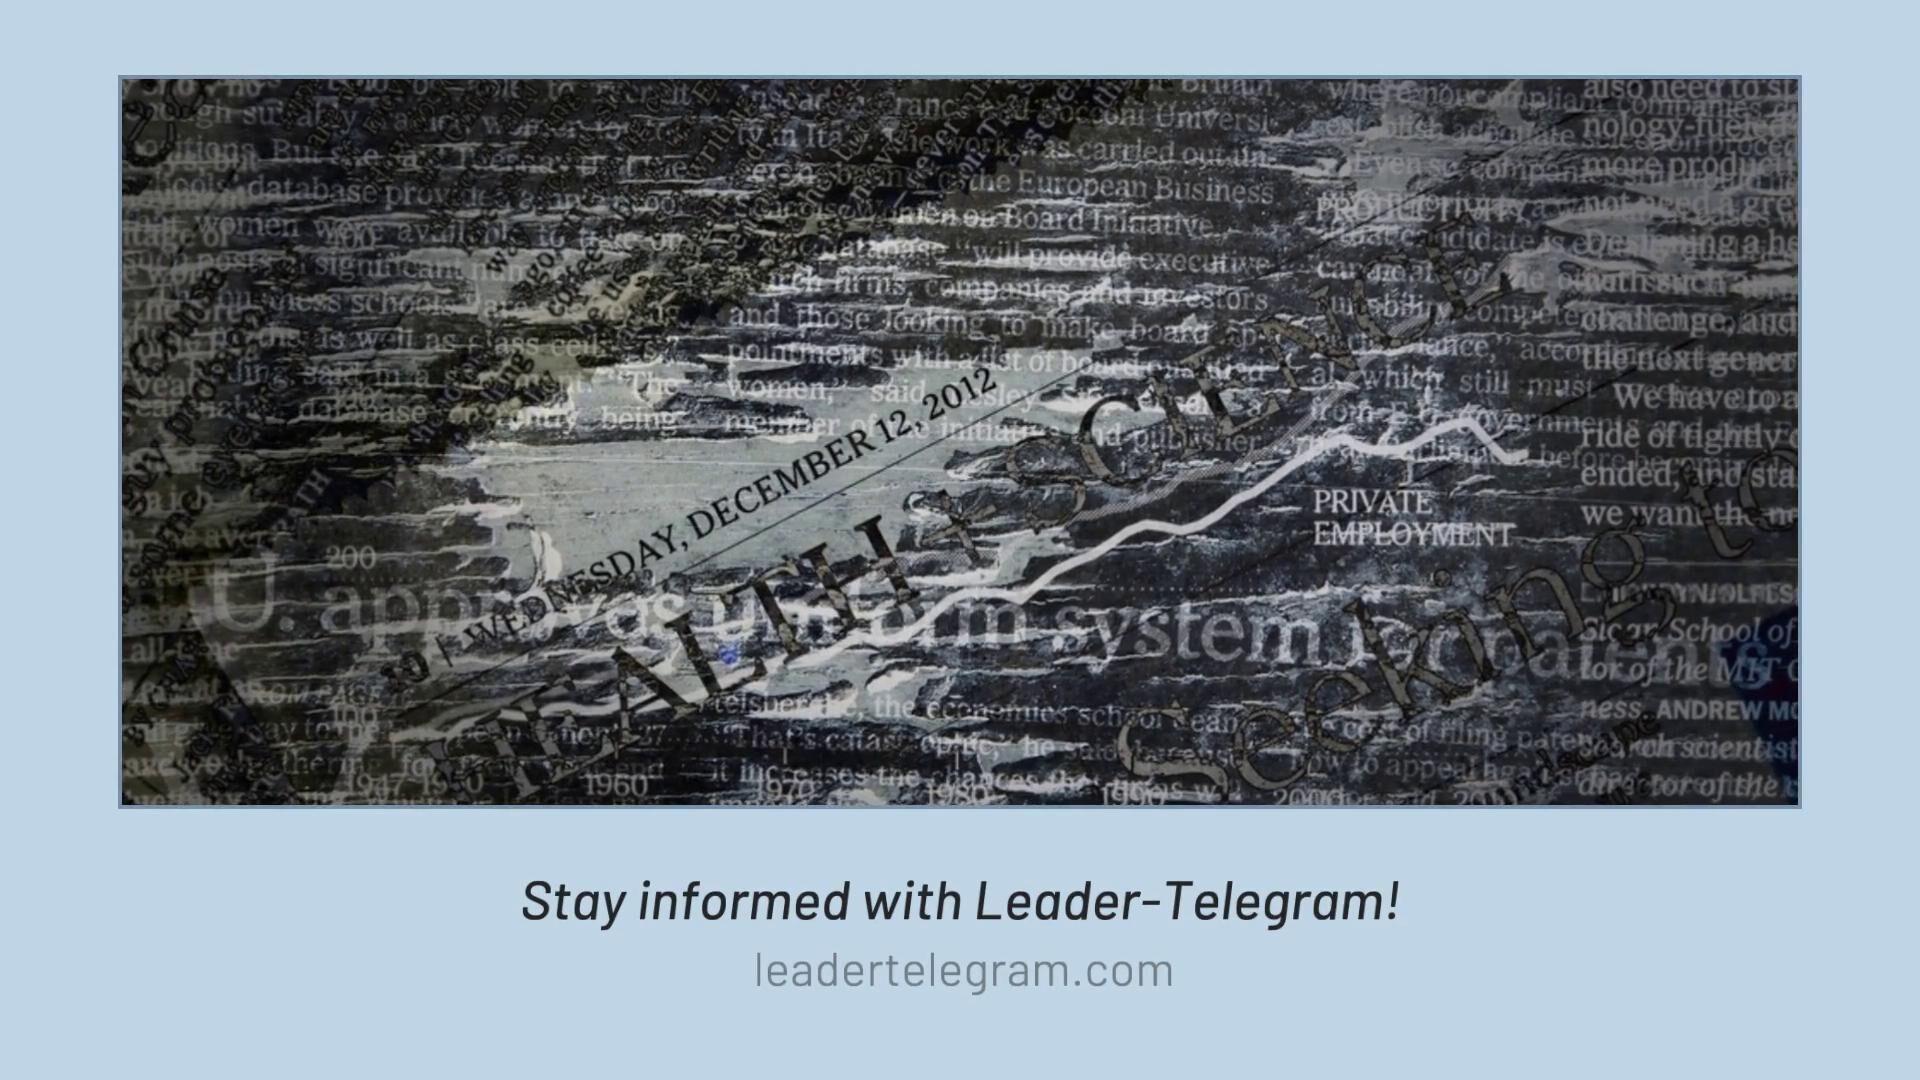 Article clipped from Leader-Telegram - ™